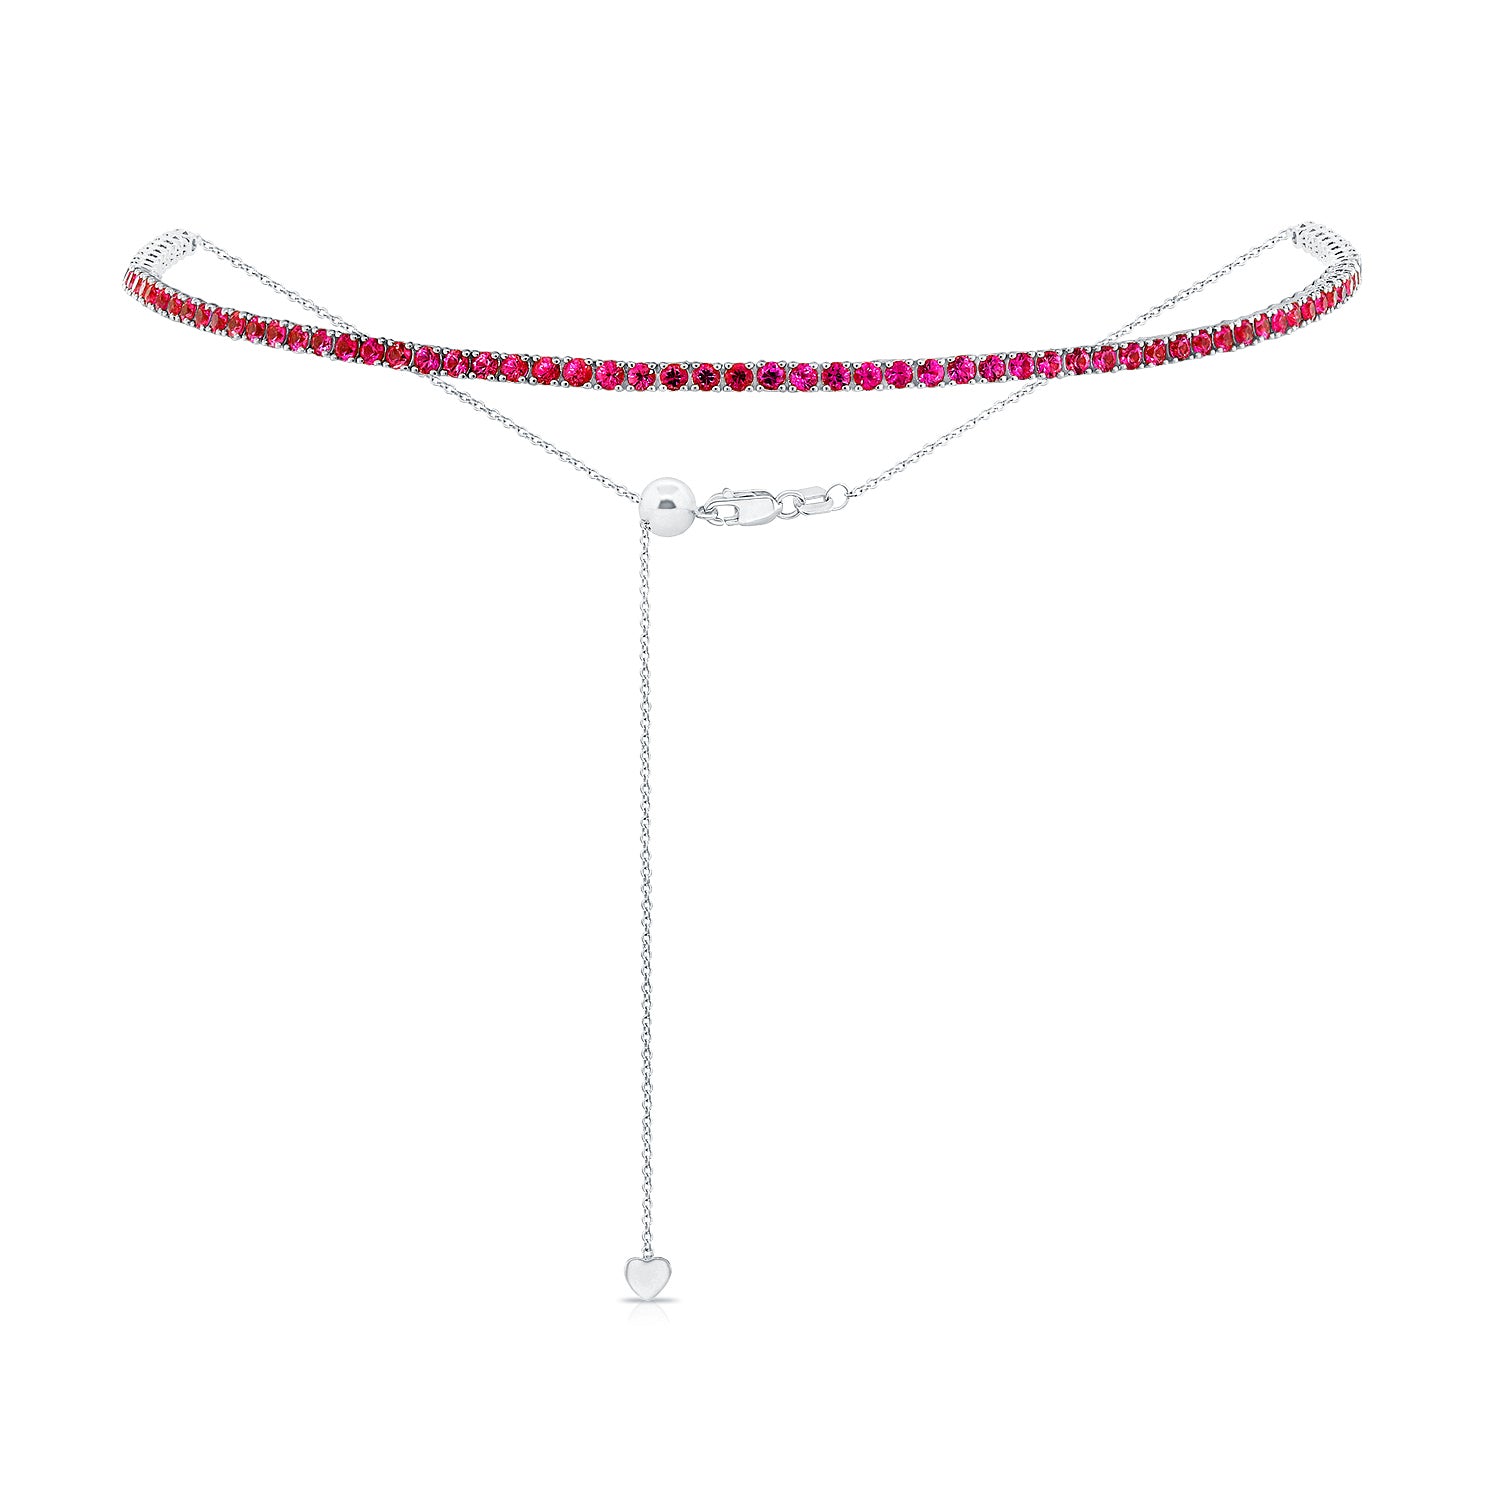 14k Gold & Red Ruby Adjustable Tennis Choker Necklace - 3.92ct